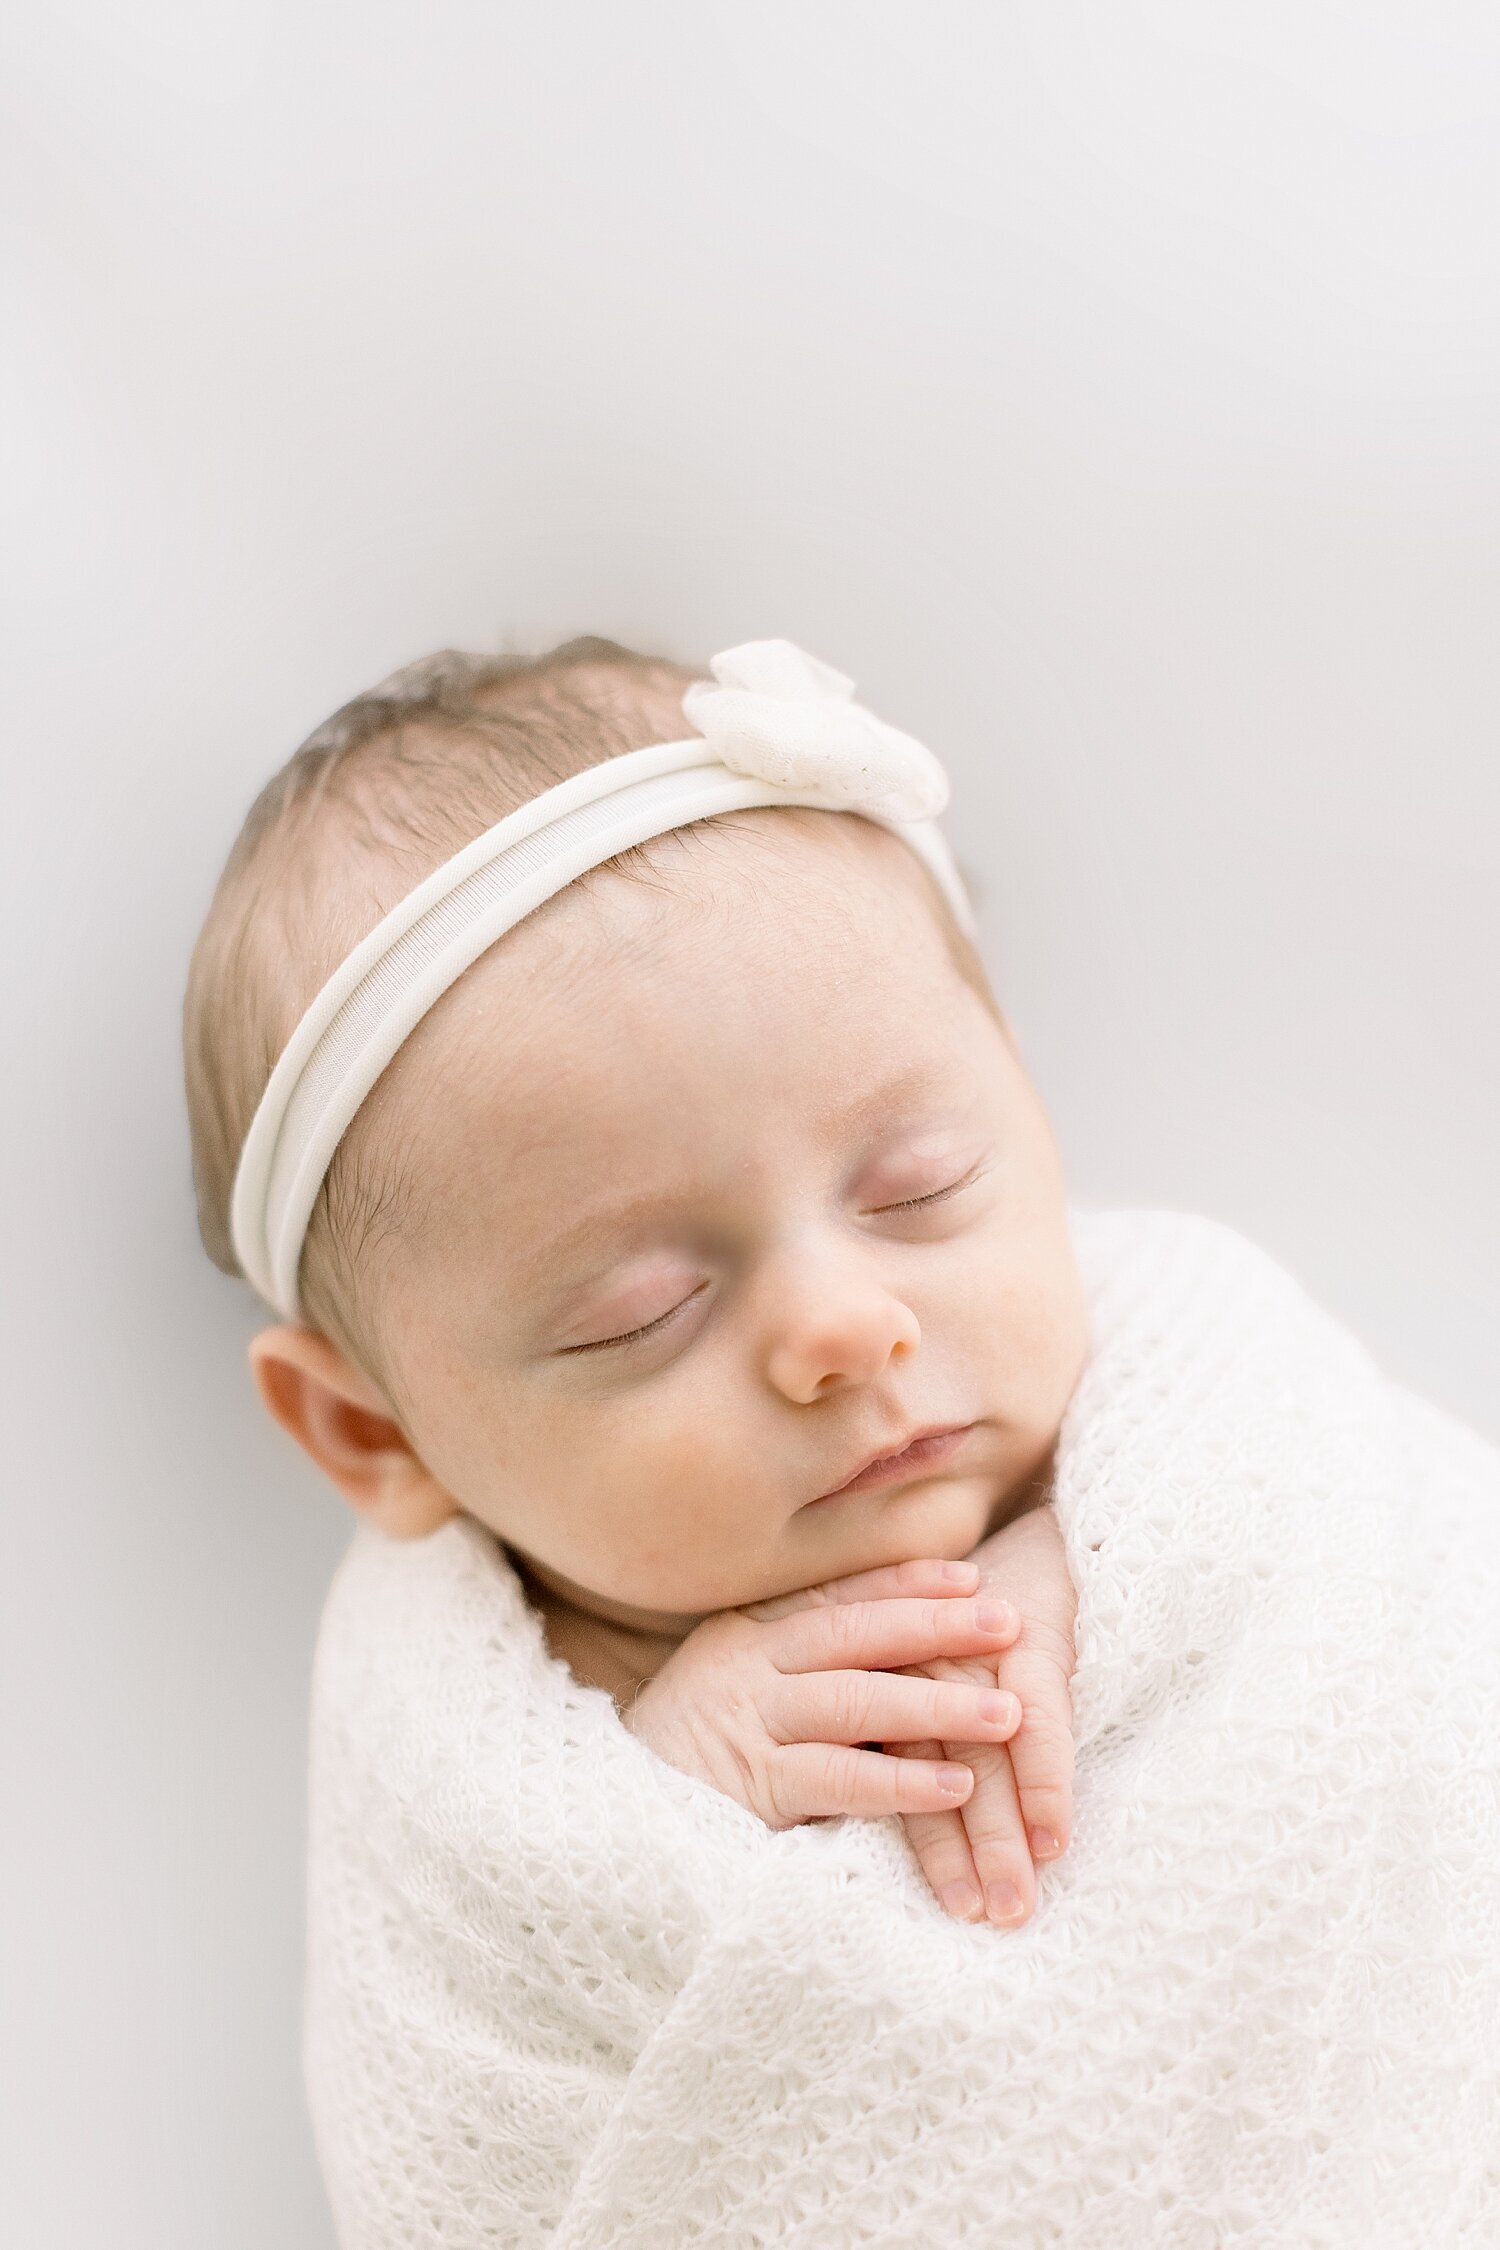 Baby girl swaddled with a sweet headband on. Photo by Ambre Williams Photography in Newport Beach, CA.